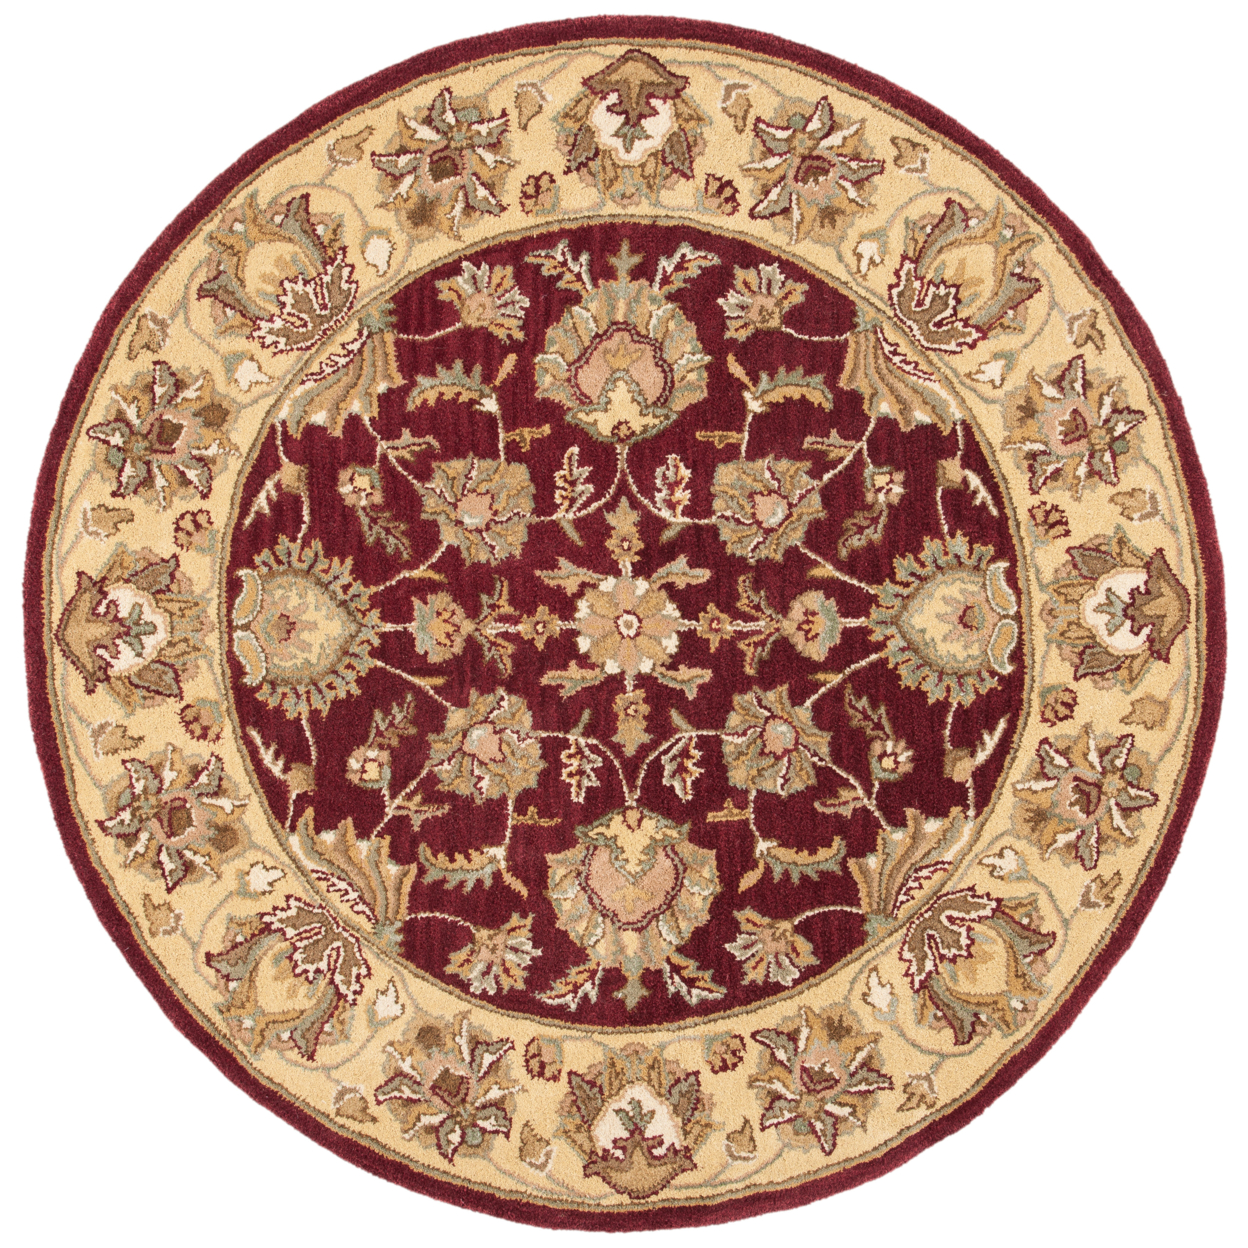 SAFAVIEH Heritage Regis Traditional Wool Area Rug, Red/Gold, 3'6" x 3'6" Round - image 1 of 4